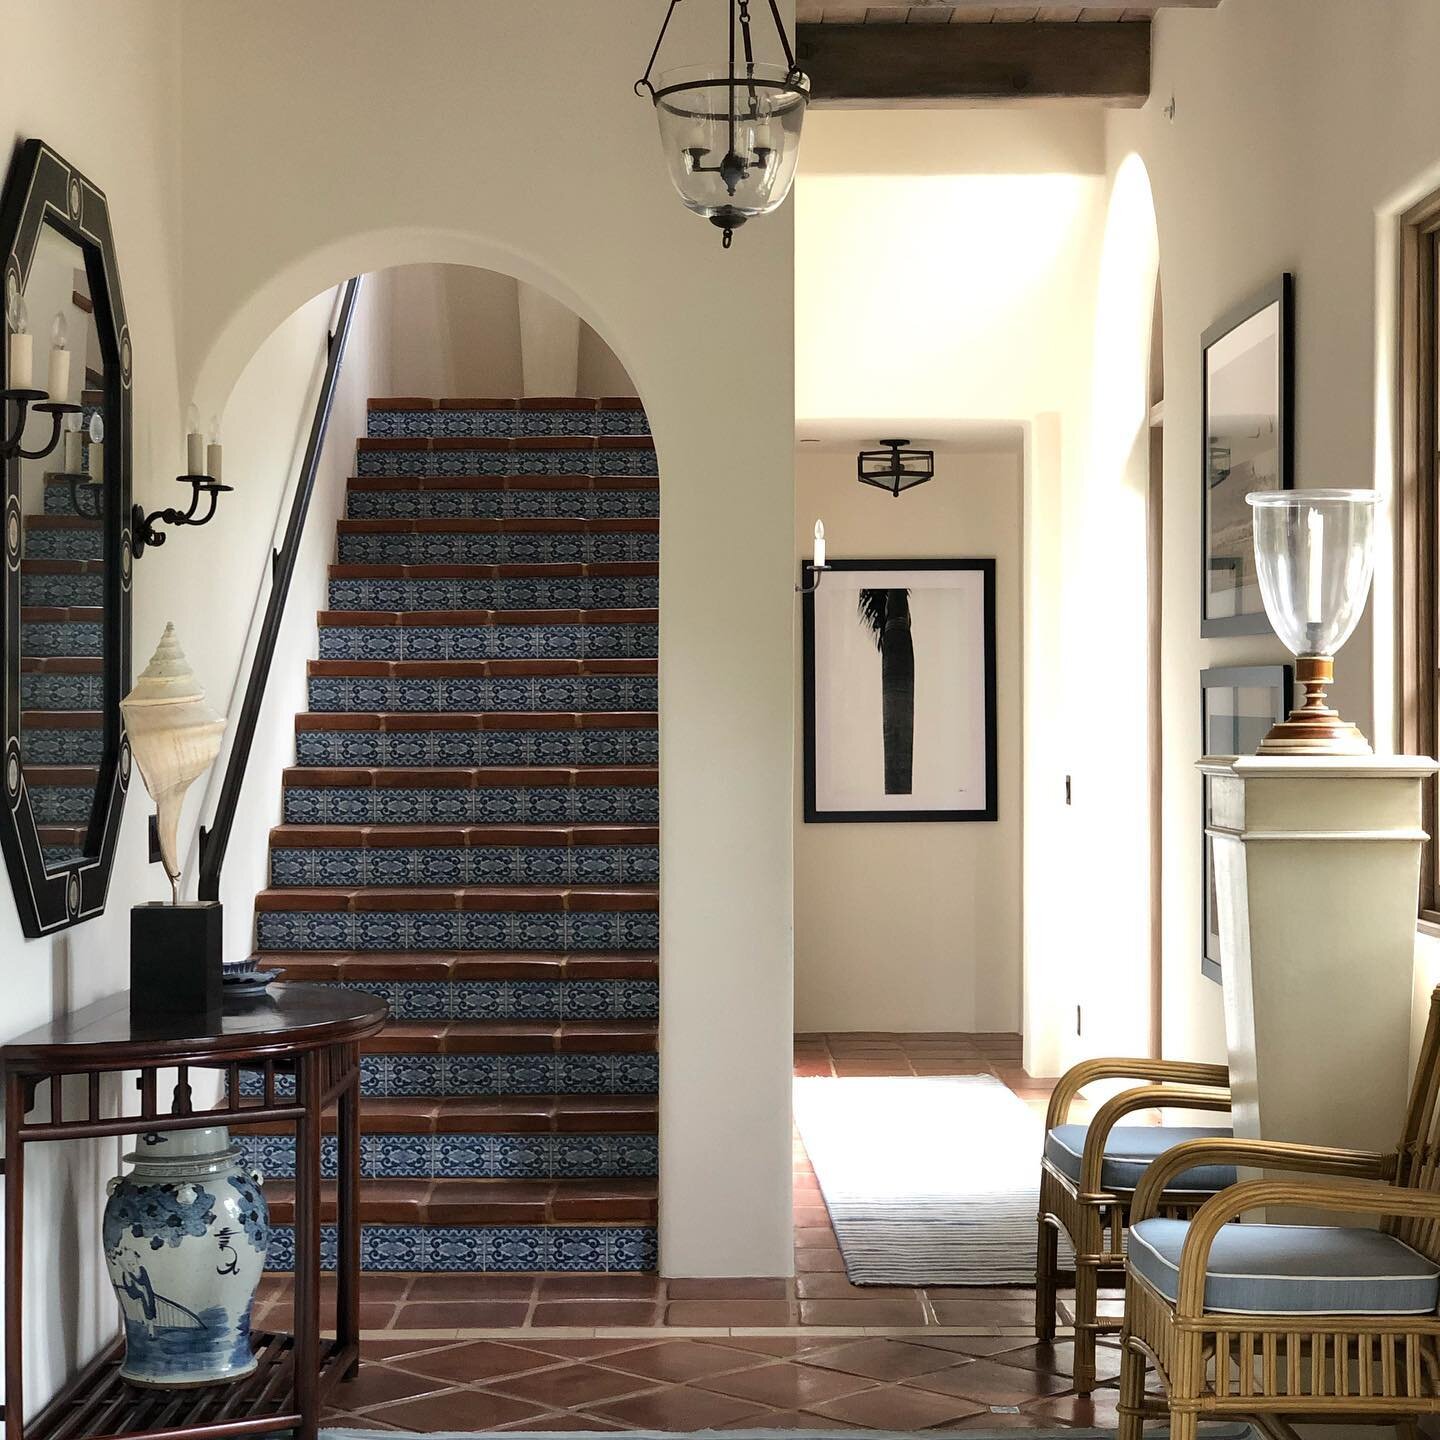 Stairs leading to the second floor of this beautiful Montecito Estate near the beach. A perfect showcase of our antique patina finish on custom iron work. We loved the final outcome and feel it complements the extensive paint and finishes we provided